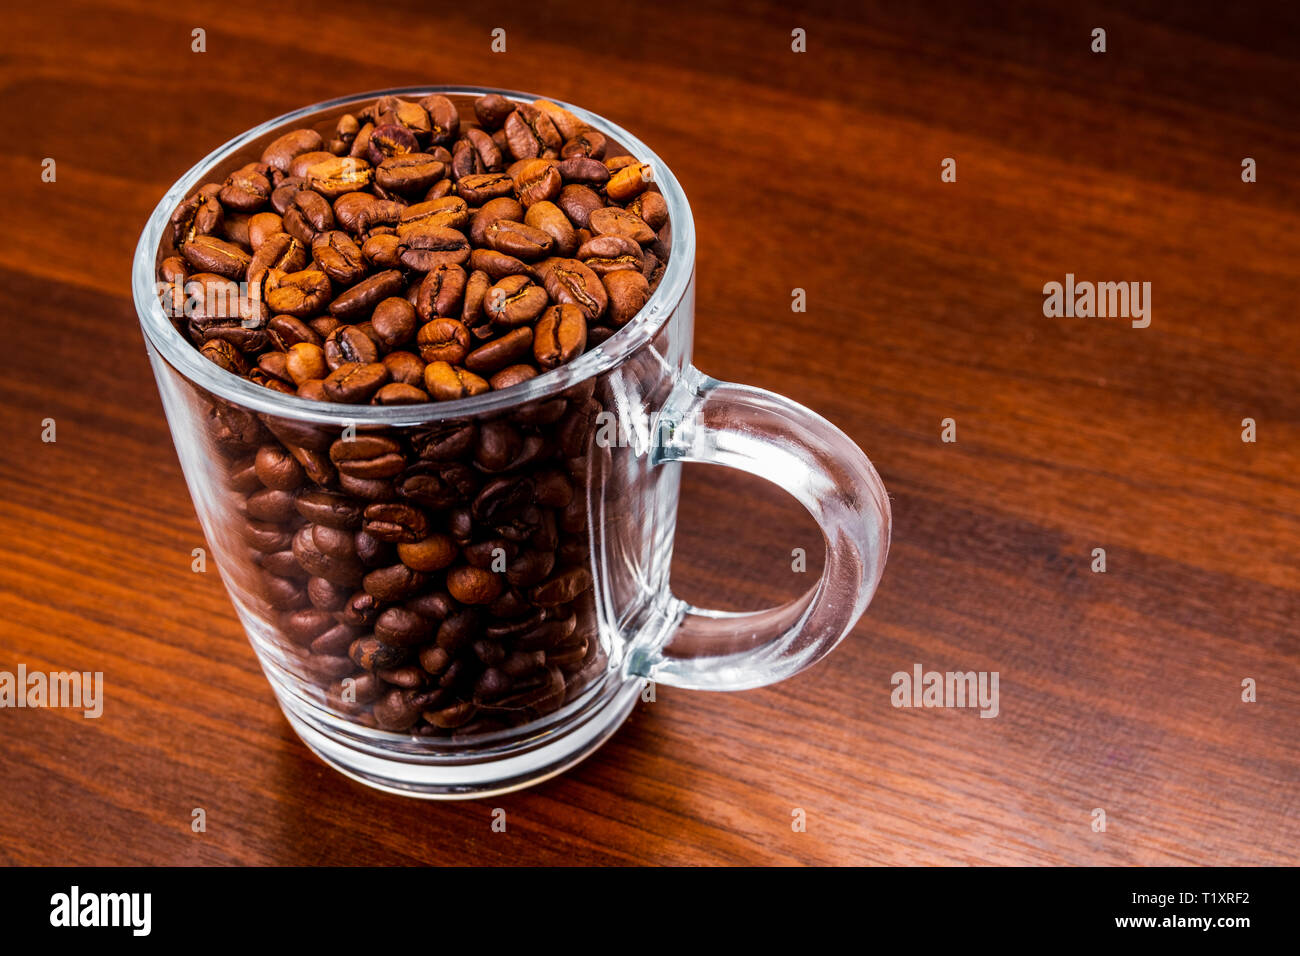 Roasted coffee beans in a glass cup isolated on a rustic dark wood table background Stock Photo